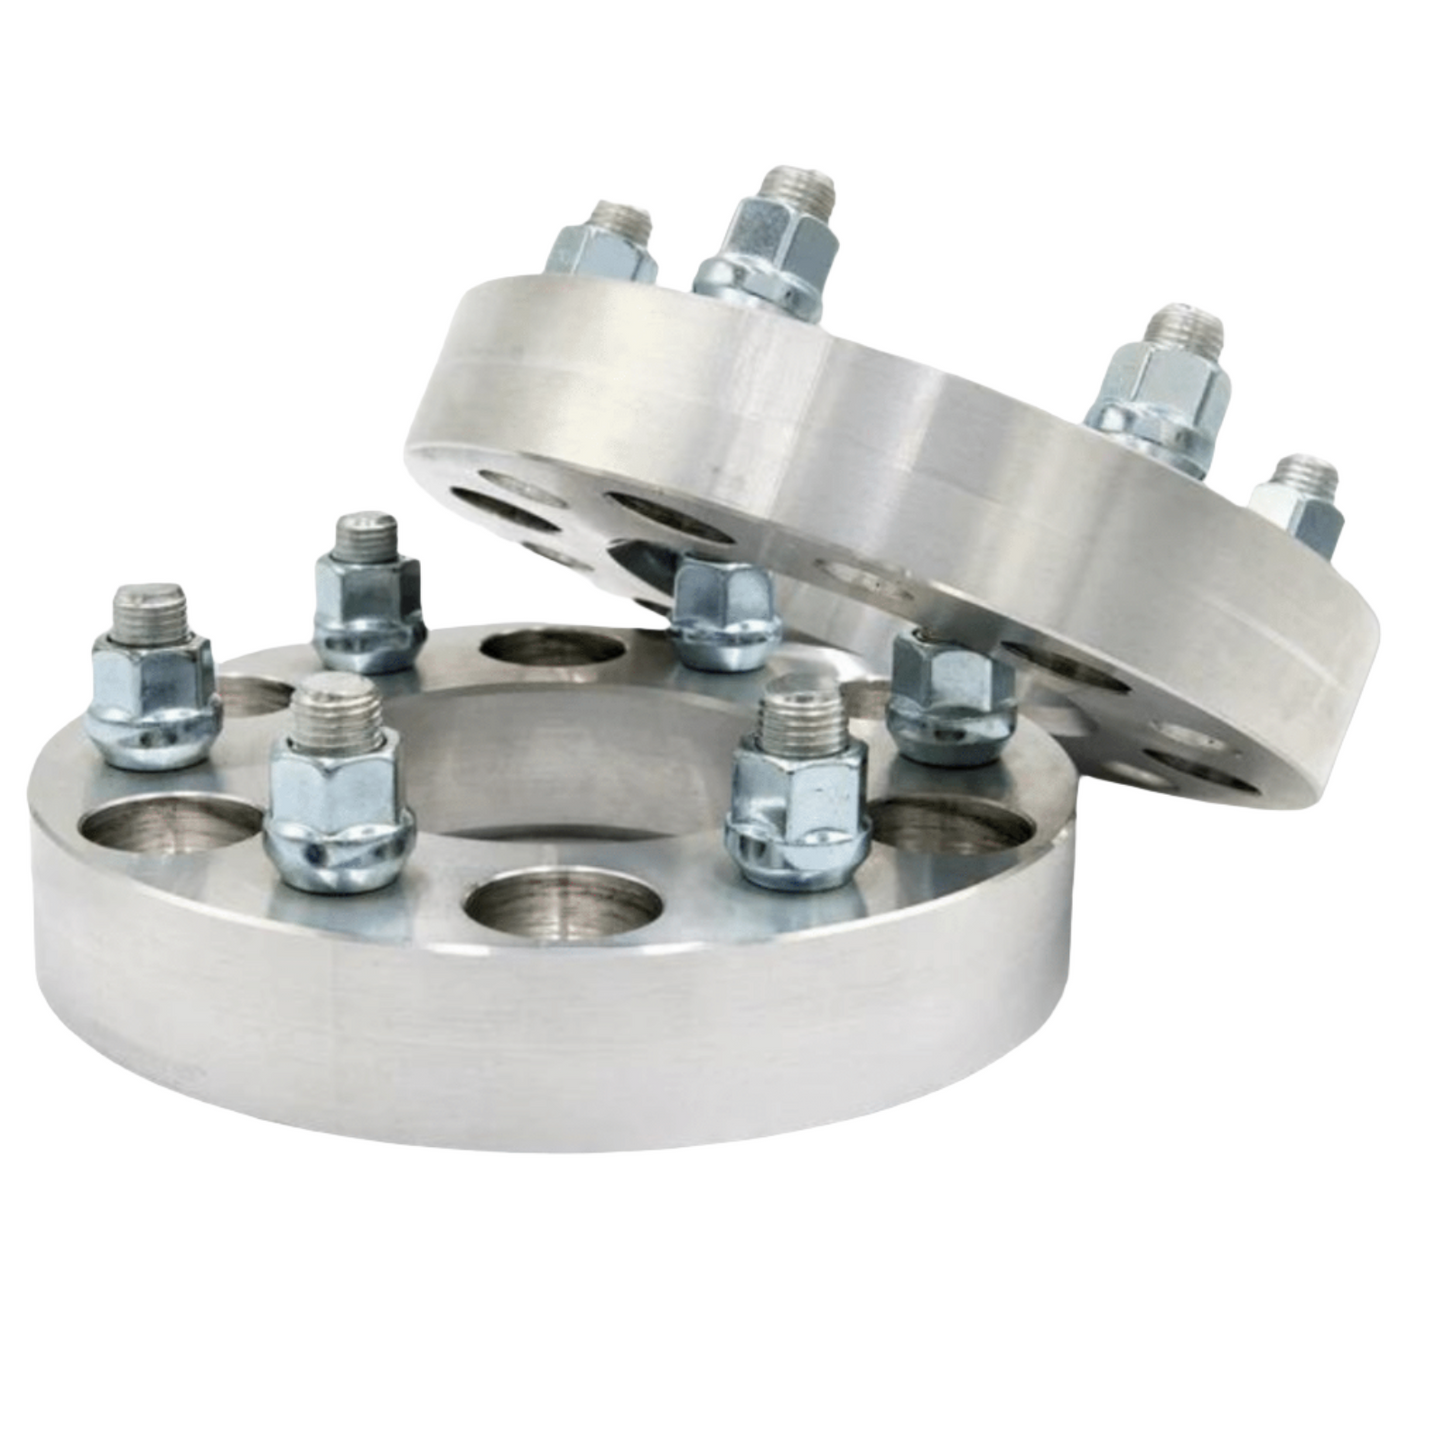 6x5.5" to 6x5.5" Wheel Spacer/Adapter - Thickness: 3/4"- 4"